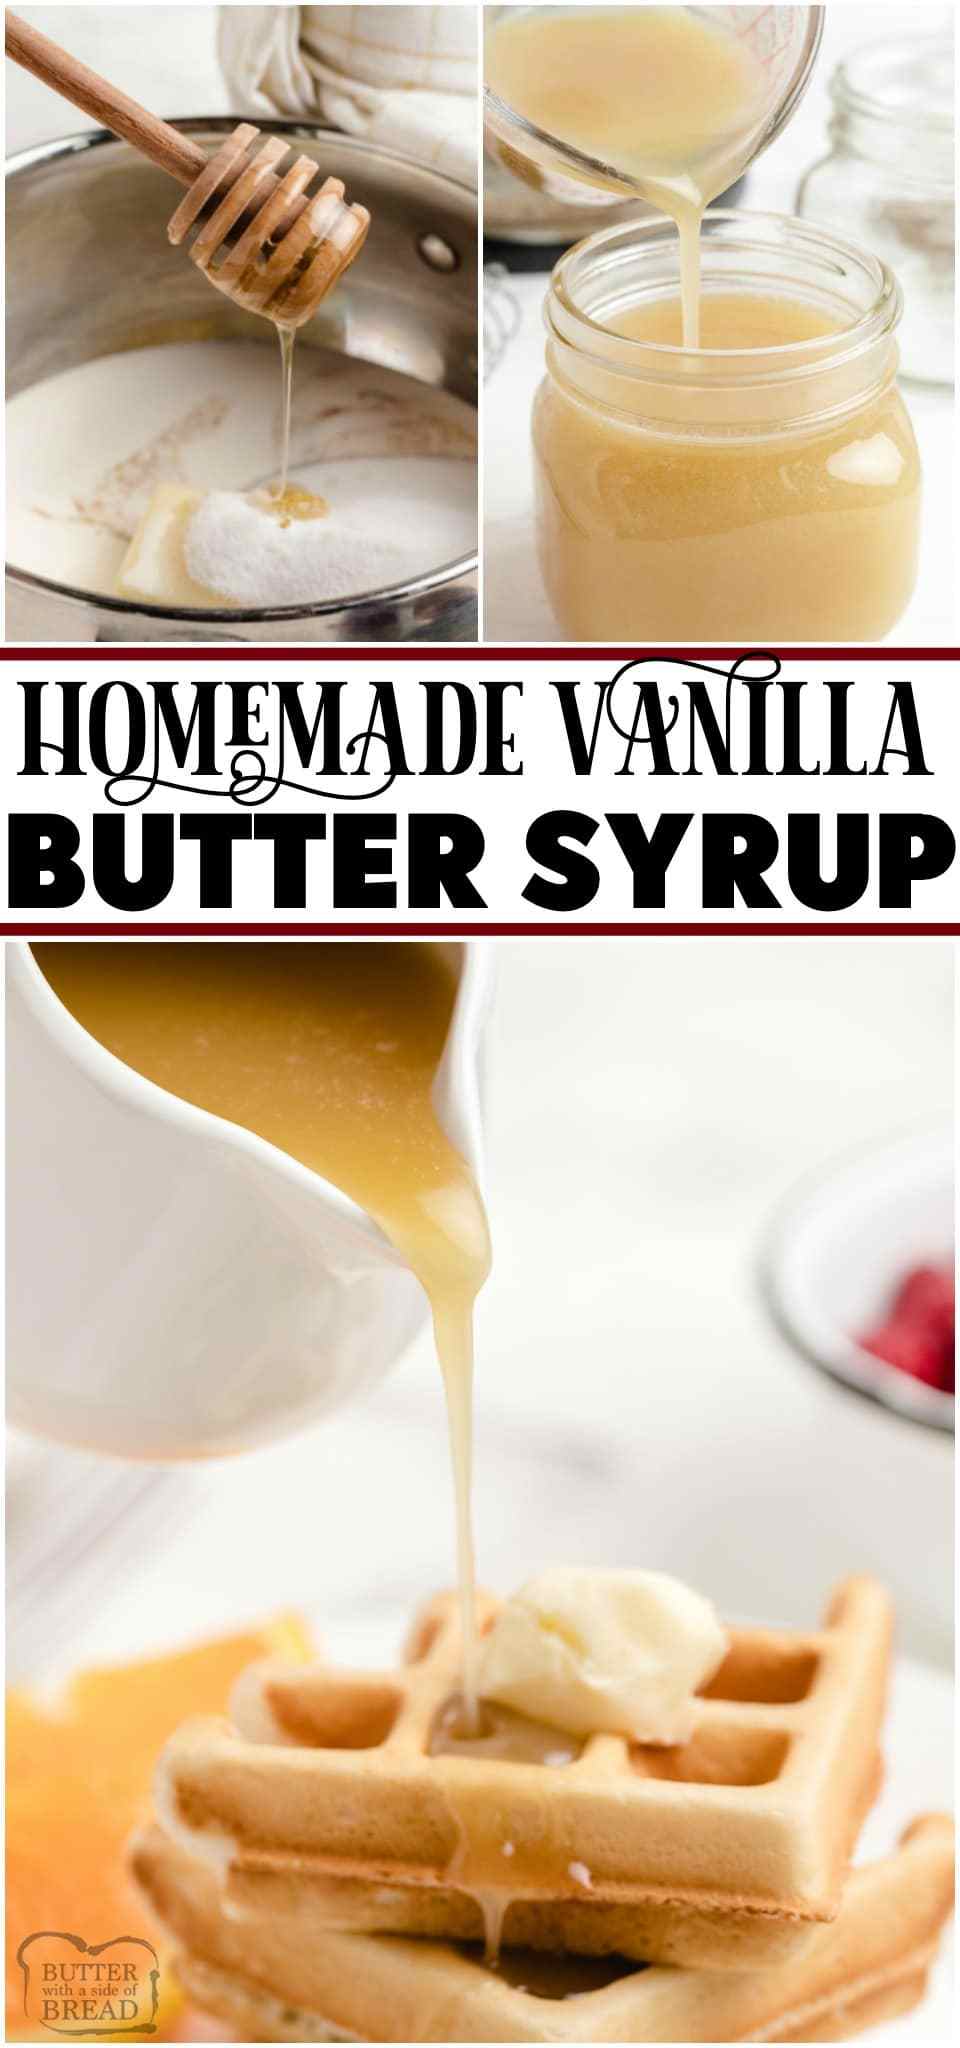 Vanilla Butter Syrup is better than anything store-bought! Homemade Syrup recipe made with butter, brown sugar, half & half, honey and vanilla extract. Easy to make syrup with fantastic buttery flavor! #syrup #vanilla #butter #breakfast #homemade #recipe from BUTTER WITH A SIDE OF BREAD